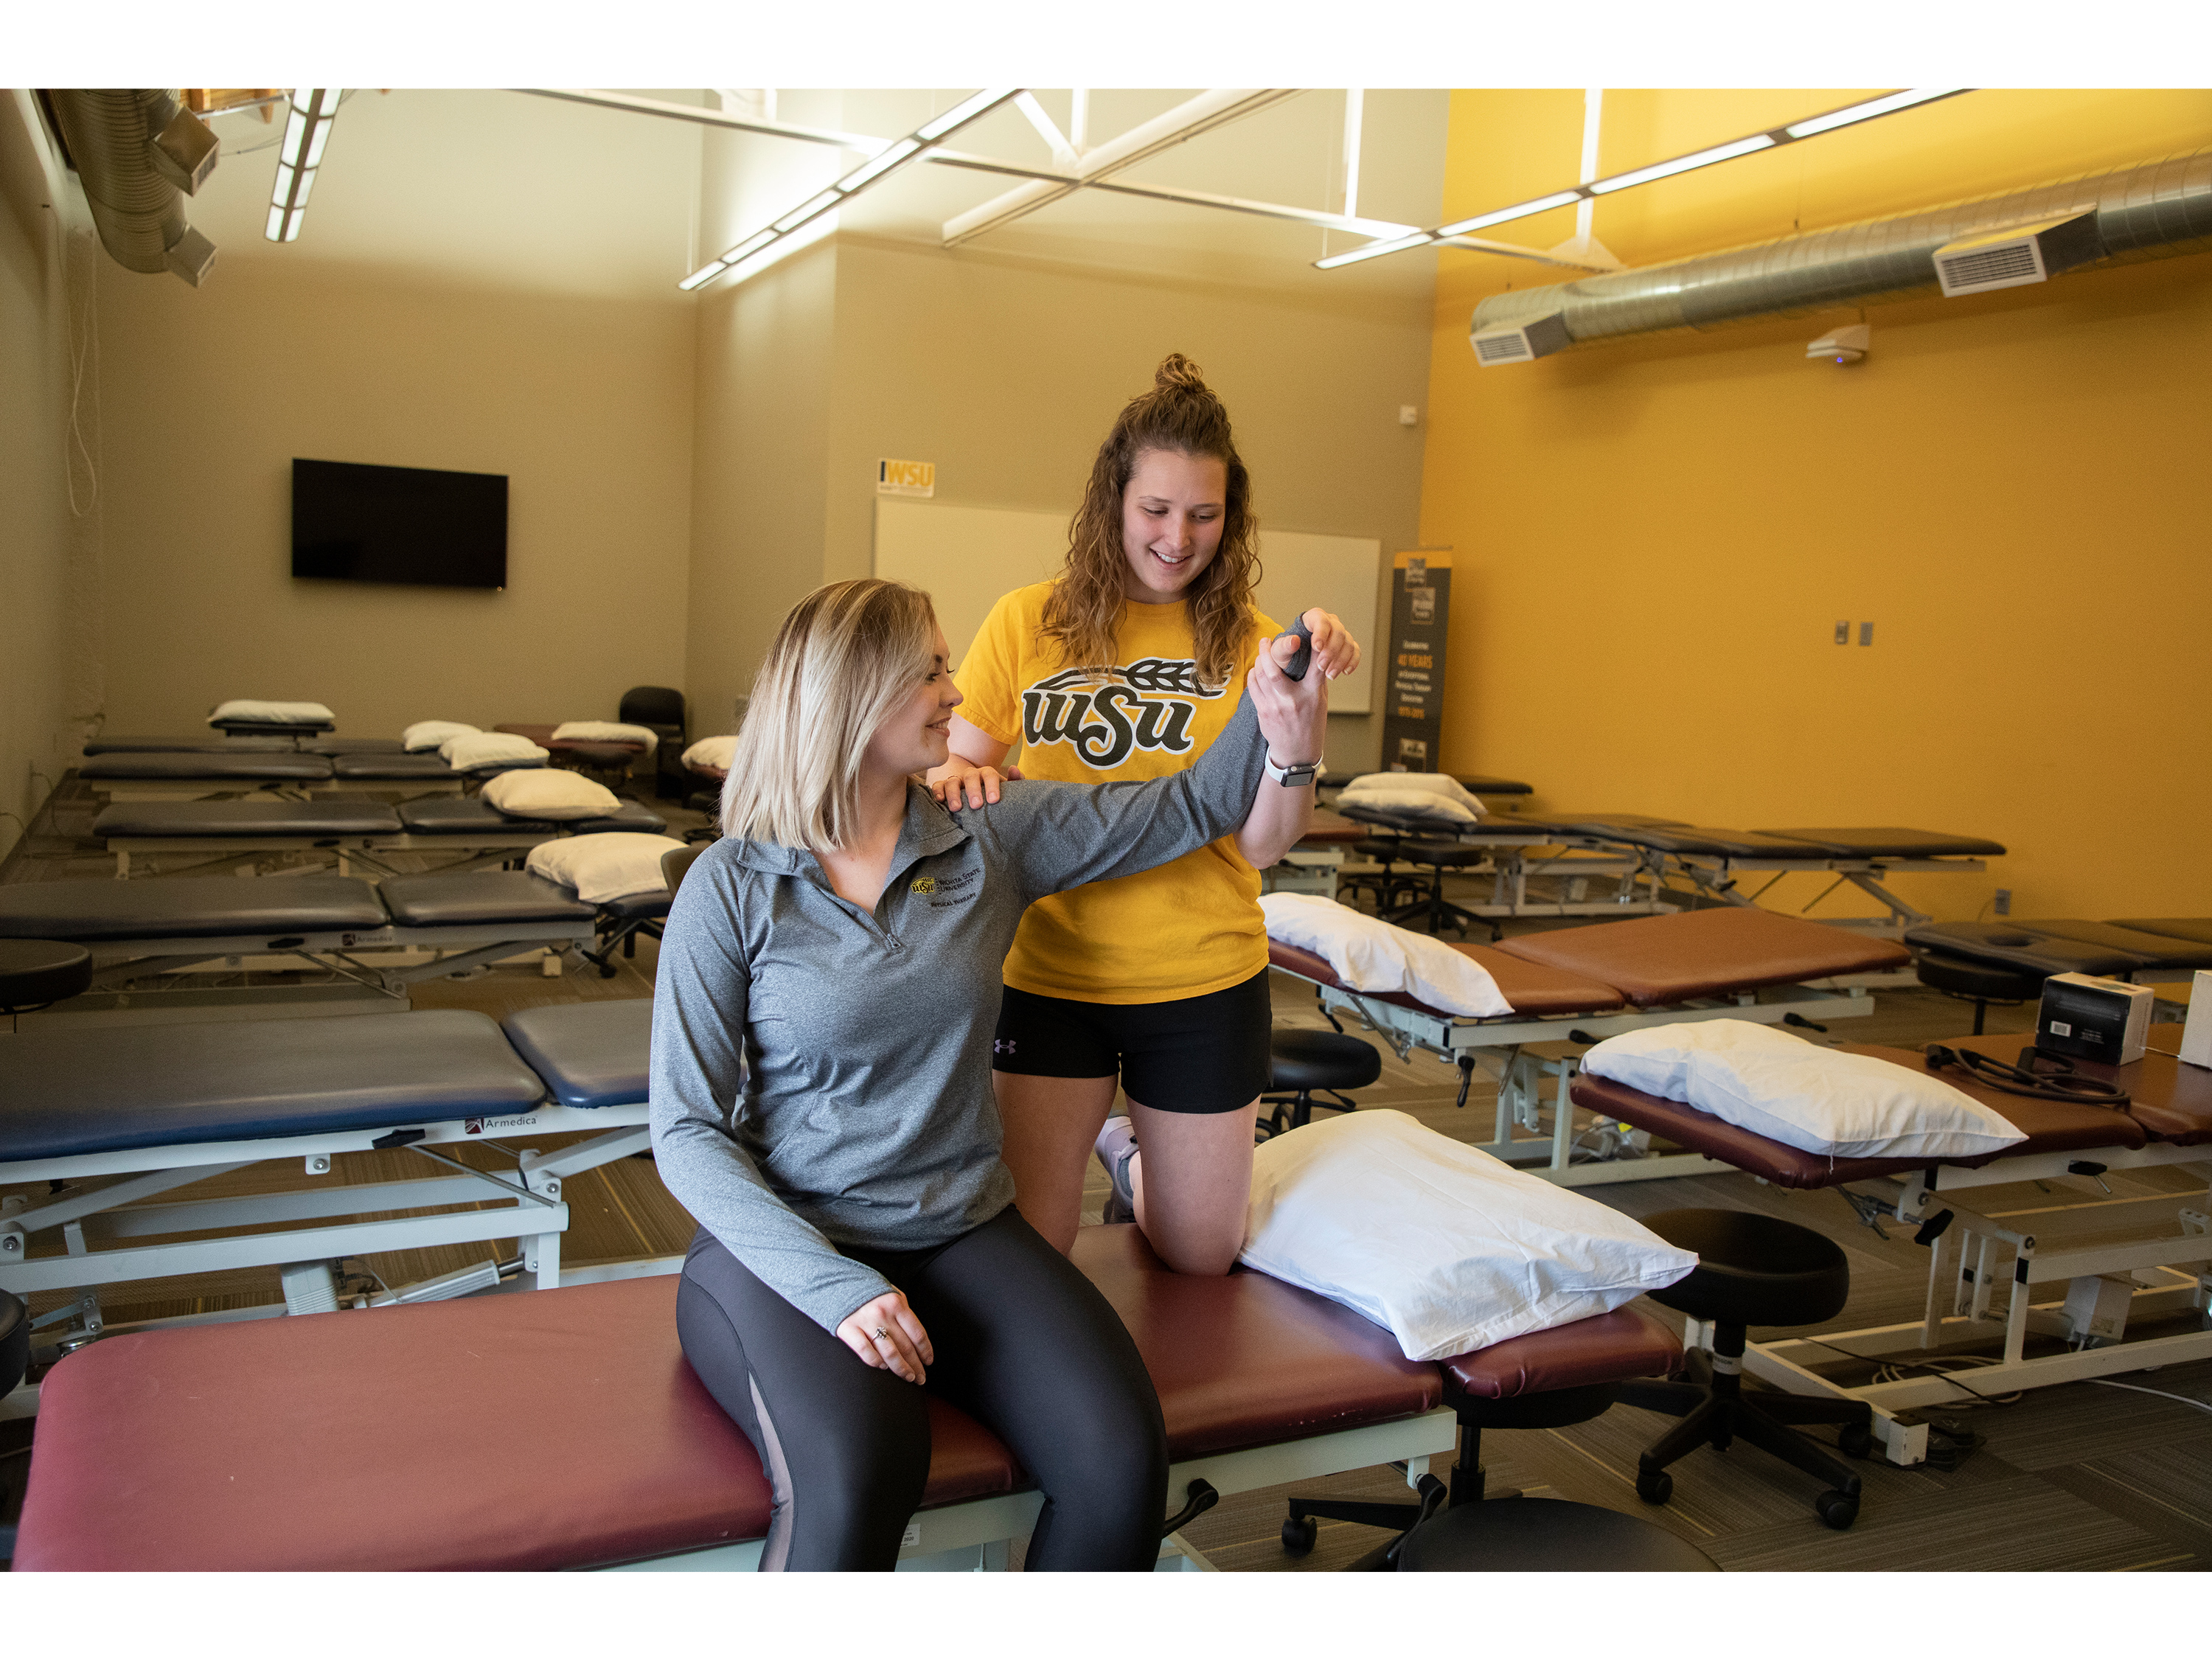 Two Physical therapy students engage in a physical therapy exercise in a well-equipped therapy room.